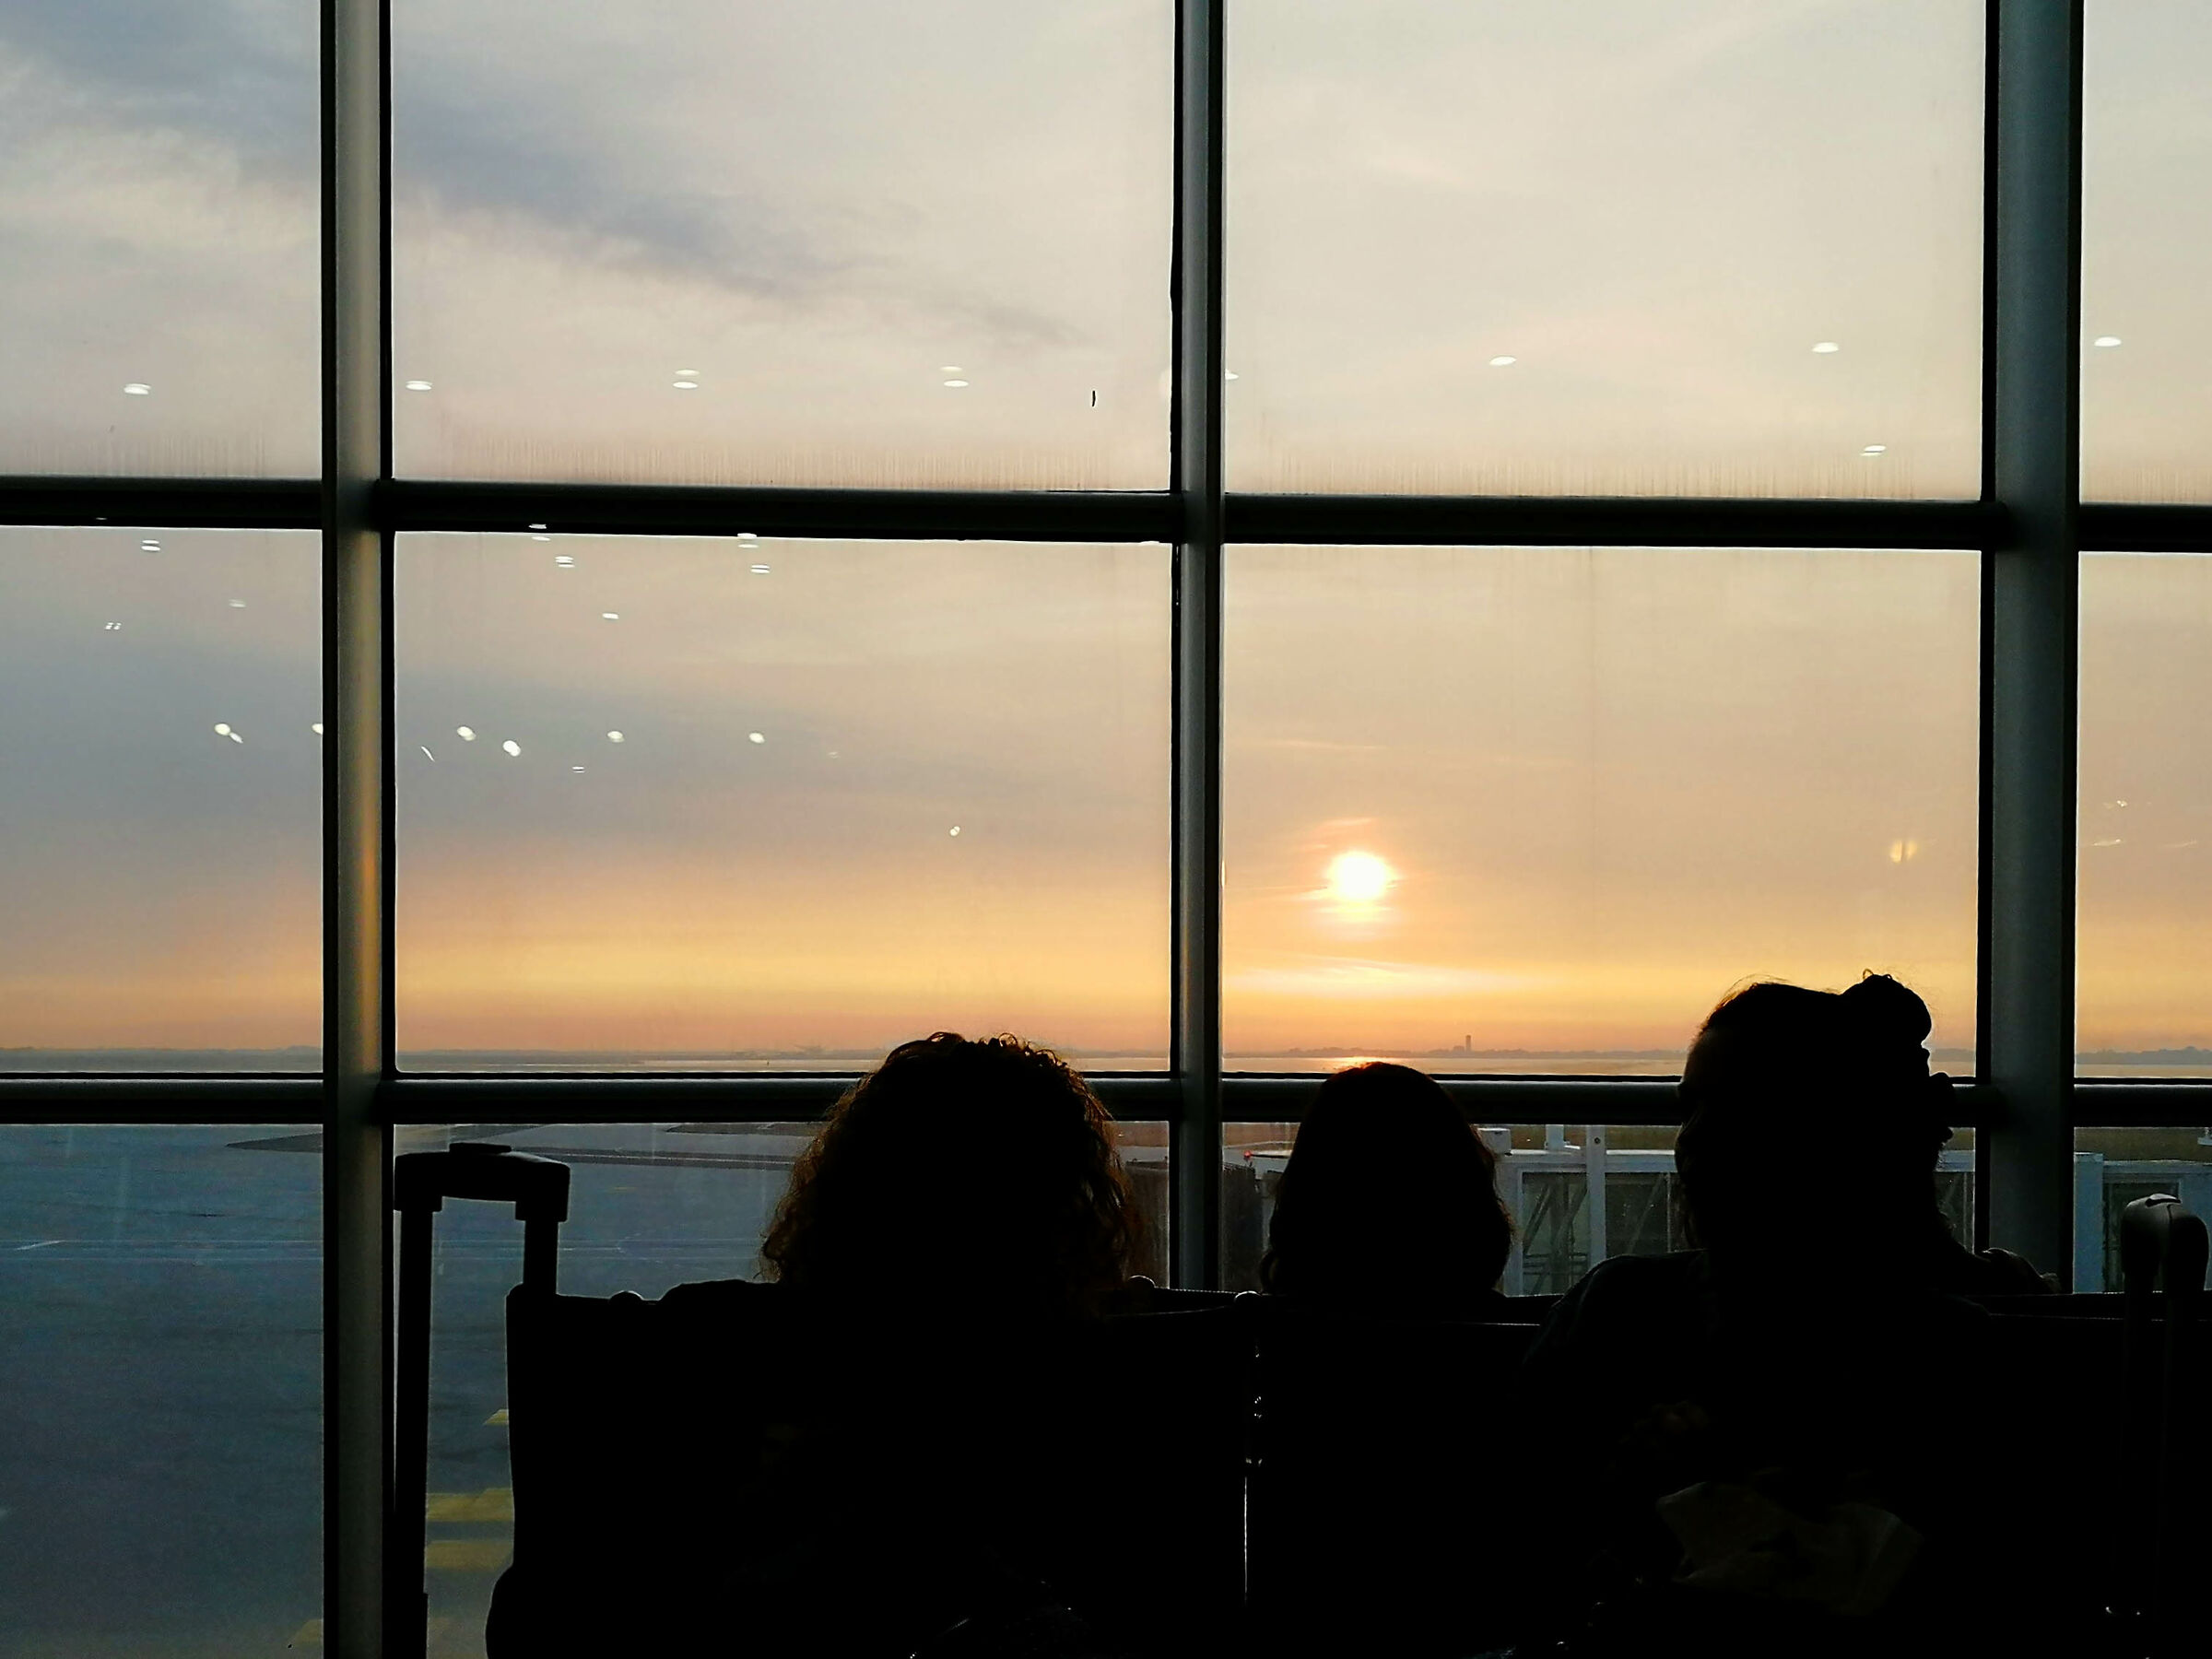 Sunrise at the airport...